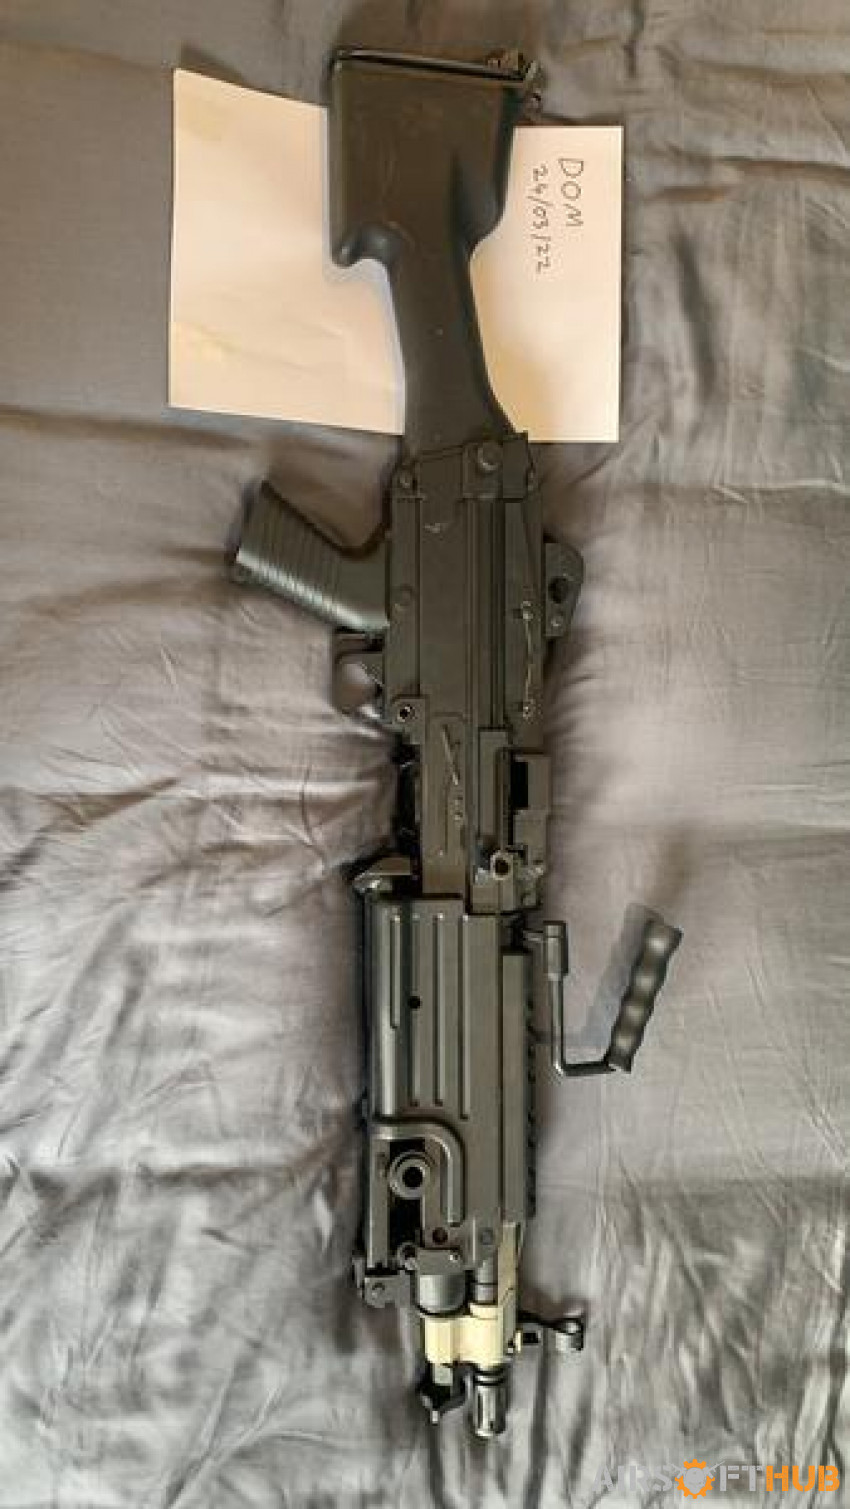 A&K M249 - Used airsoft equipment